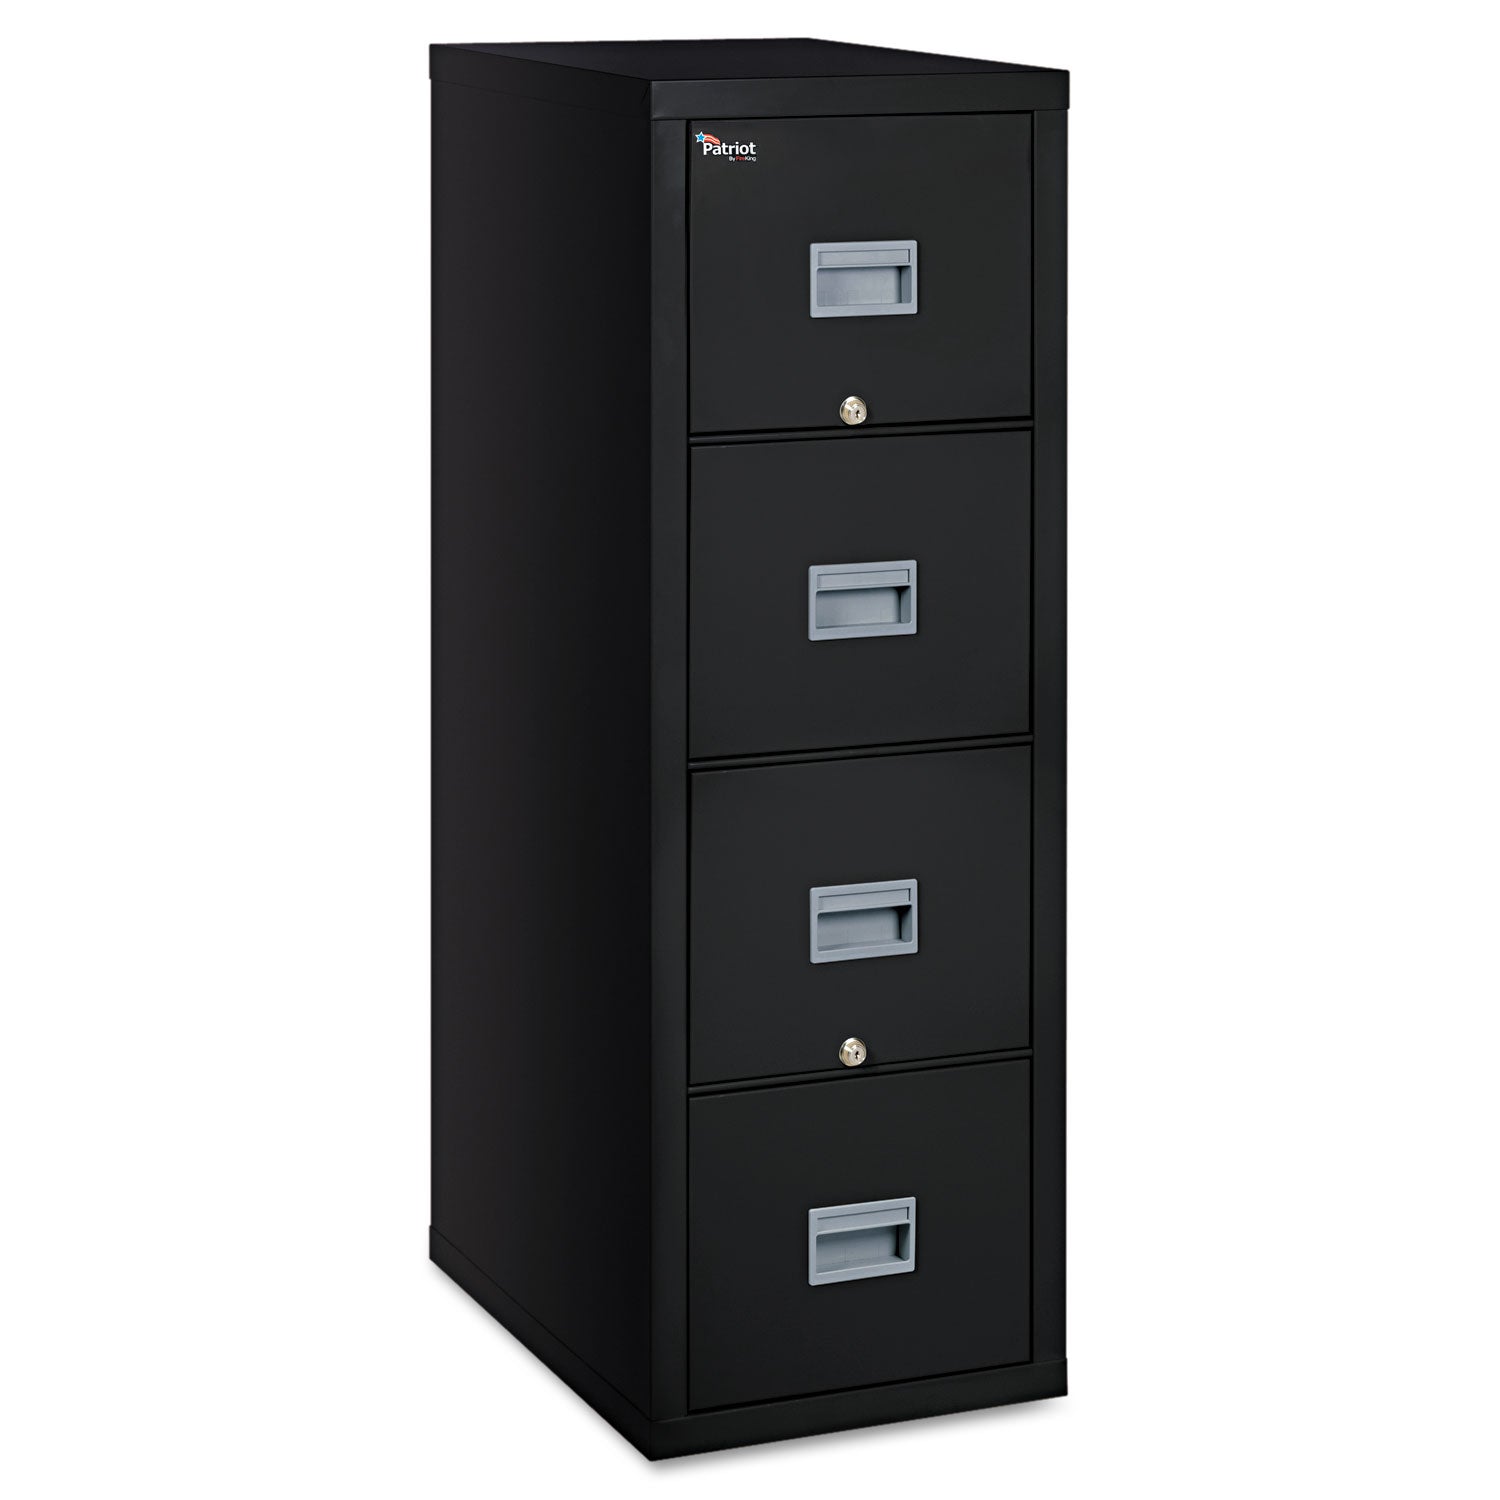 Patriot by FireKing Insulated Fire File, 1-Hour Fire Protection, 4 Legal/Letter File Drawers, Black, 17.75" x 25" x 52.75 - 